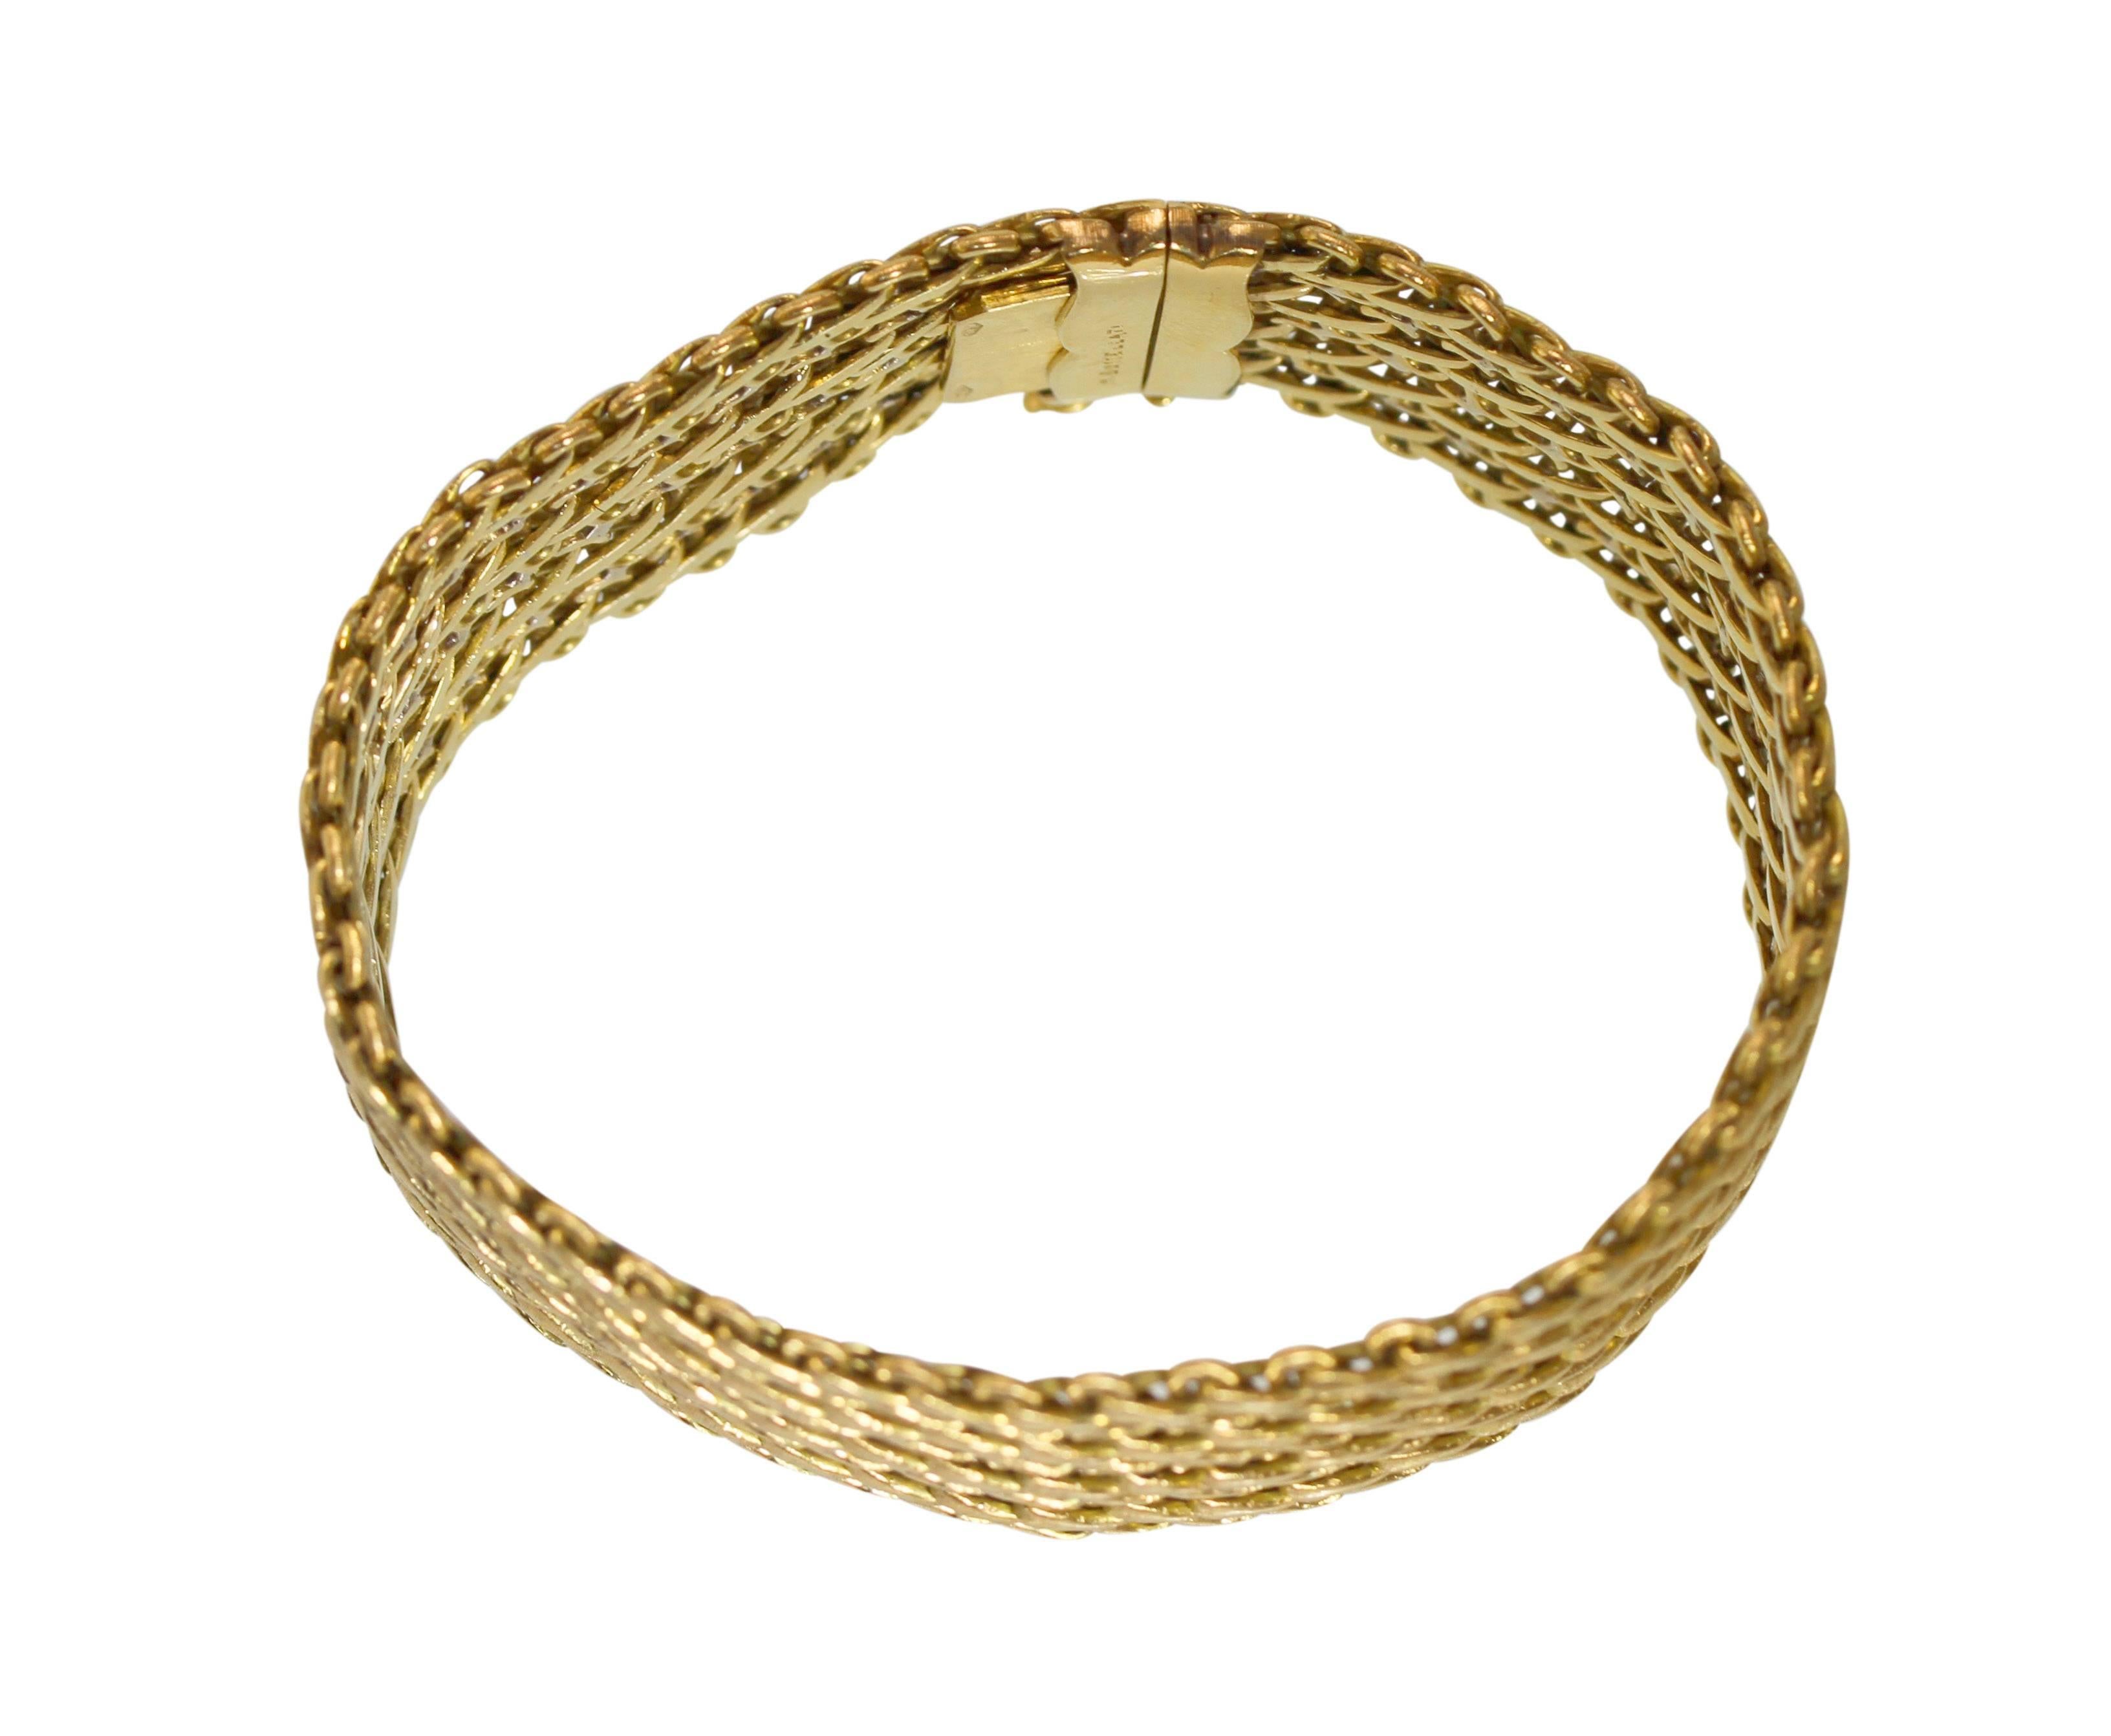 An 18 karat yellow gold by Buccellati, Italy, circa 1970, the wide articulated strap composed of numerous small gold links, gross weight 64.4 grams, length 7 1/4 inches, width 1 inch, signed M. Buccellati, Italian gold marks.